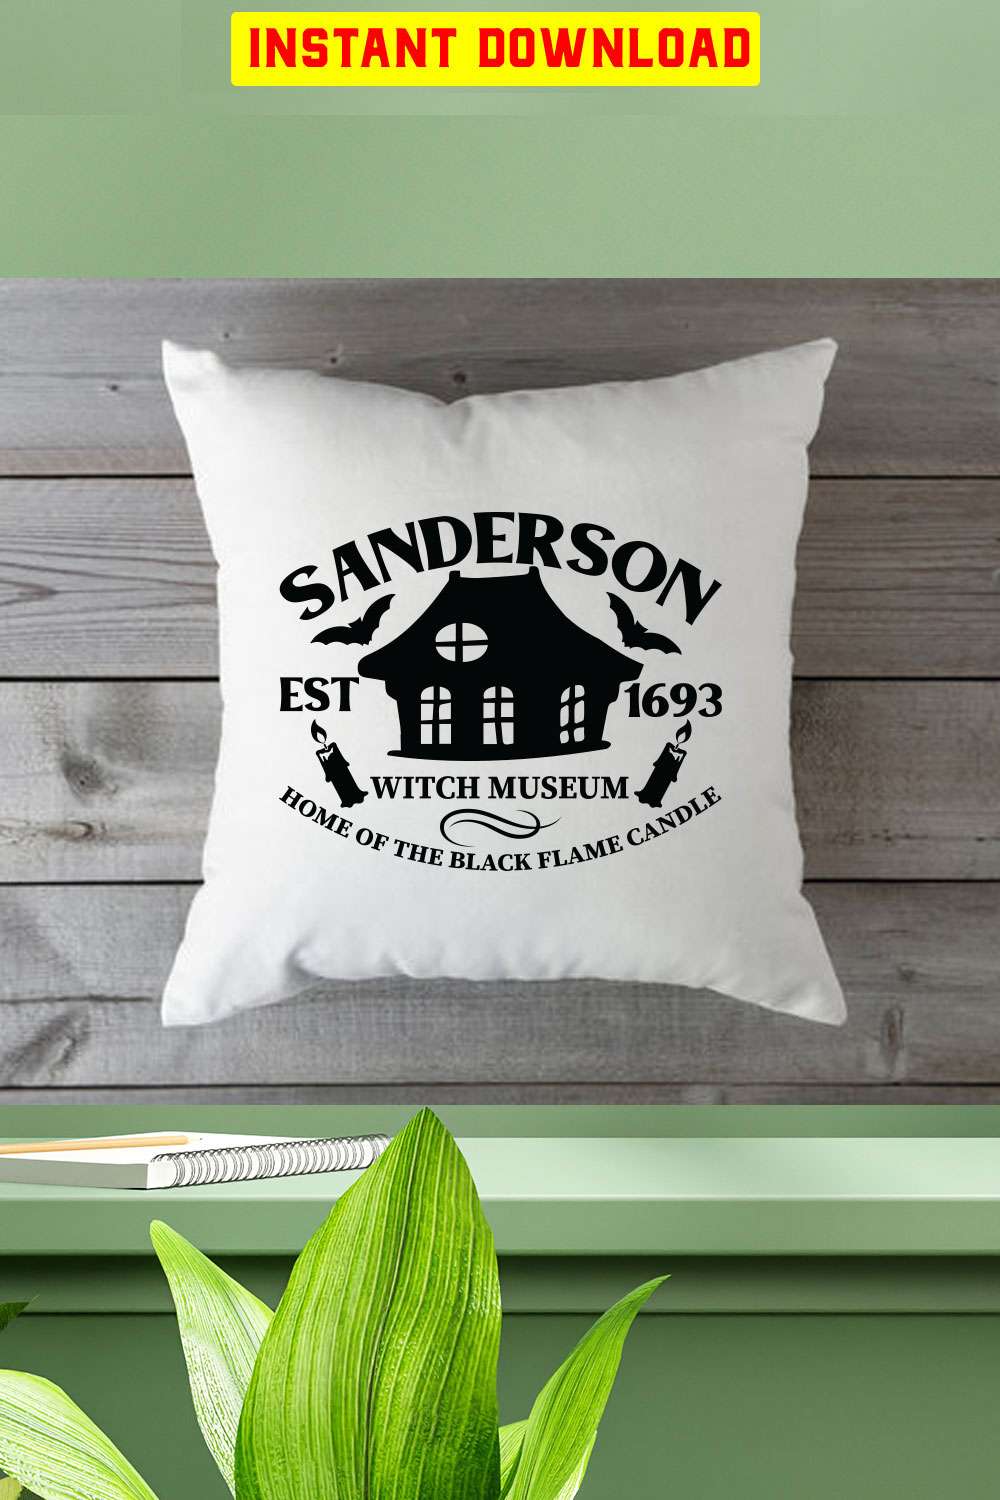 Sanderson Est 1693 Witch Museum Home Of The Black Flame Candle pinterest preview image.